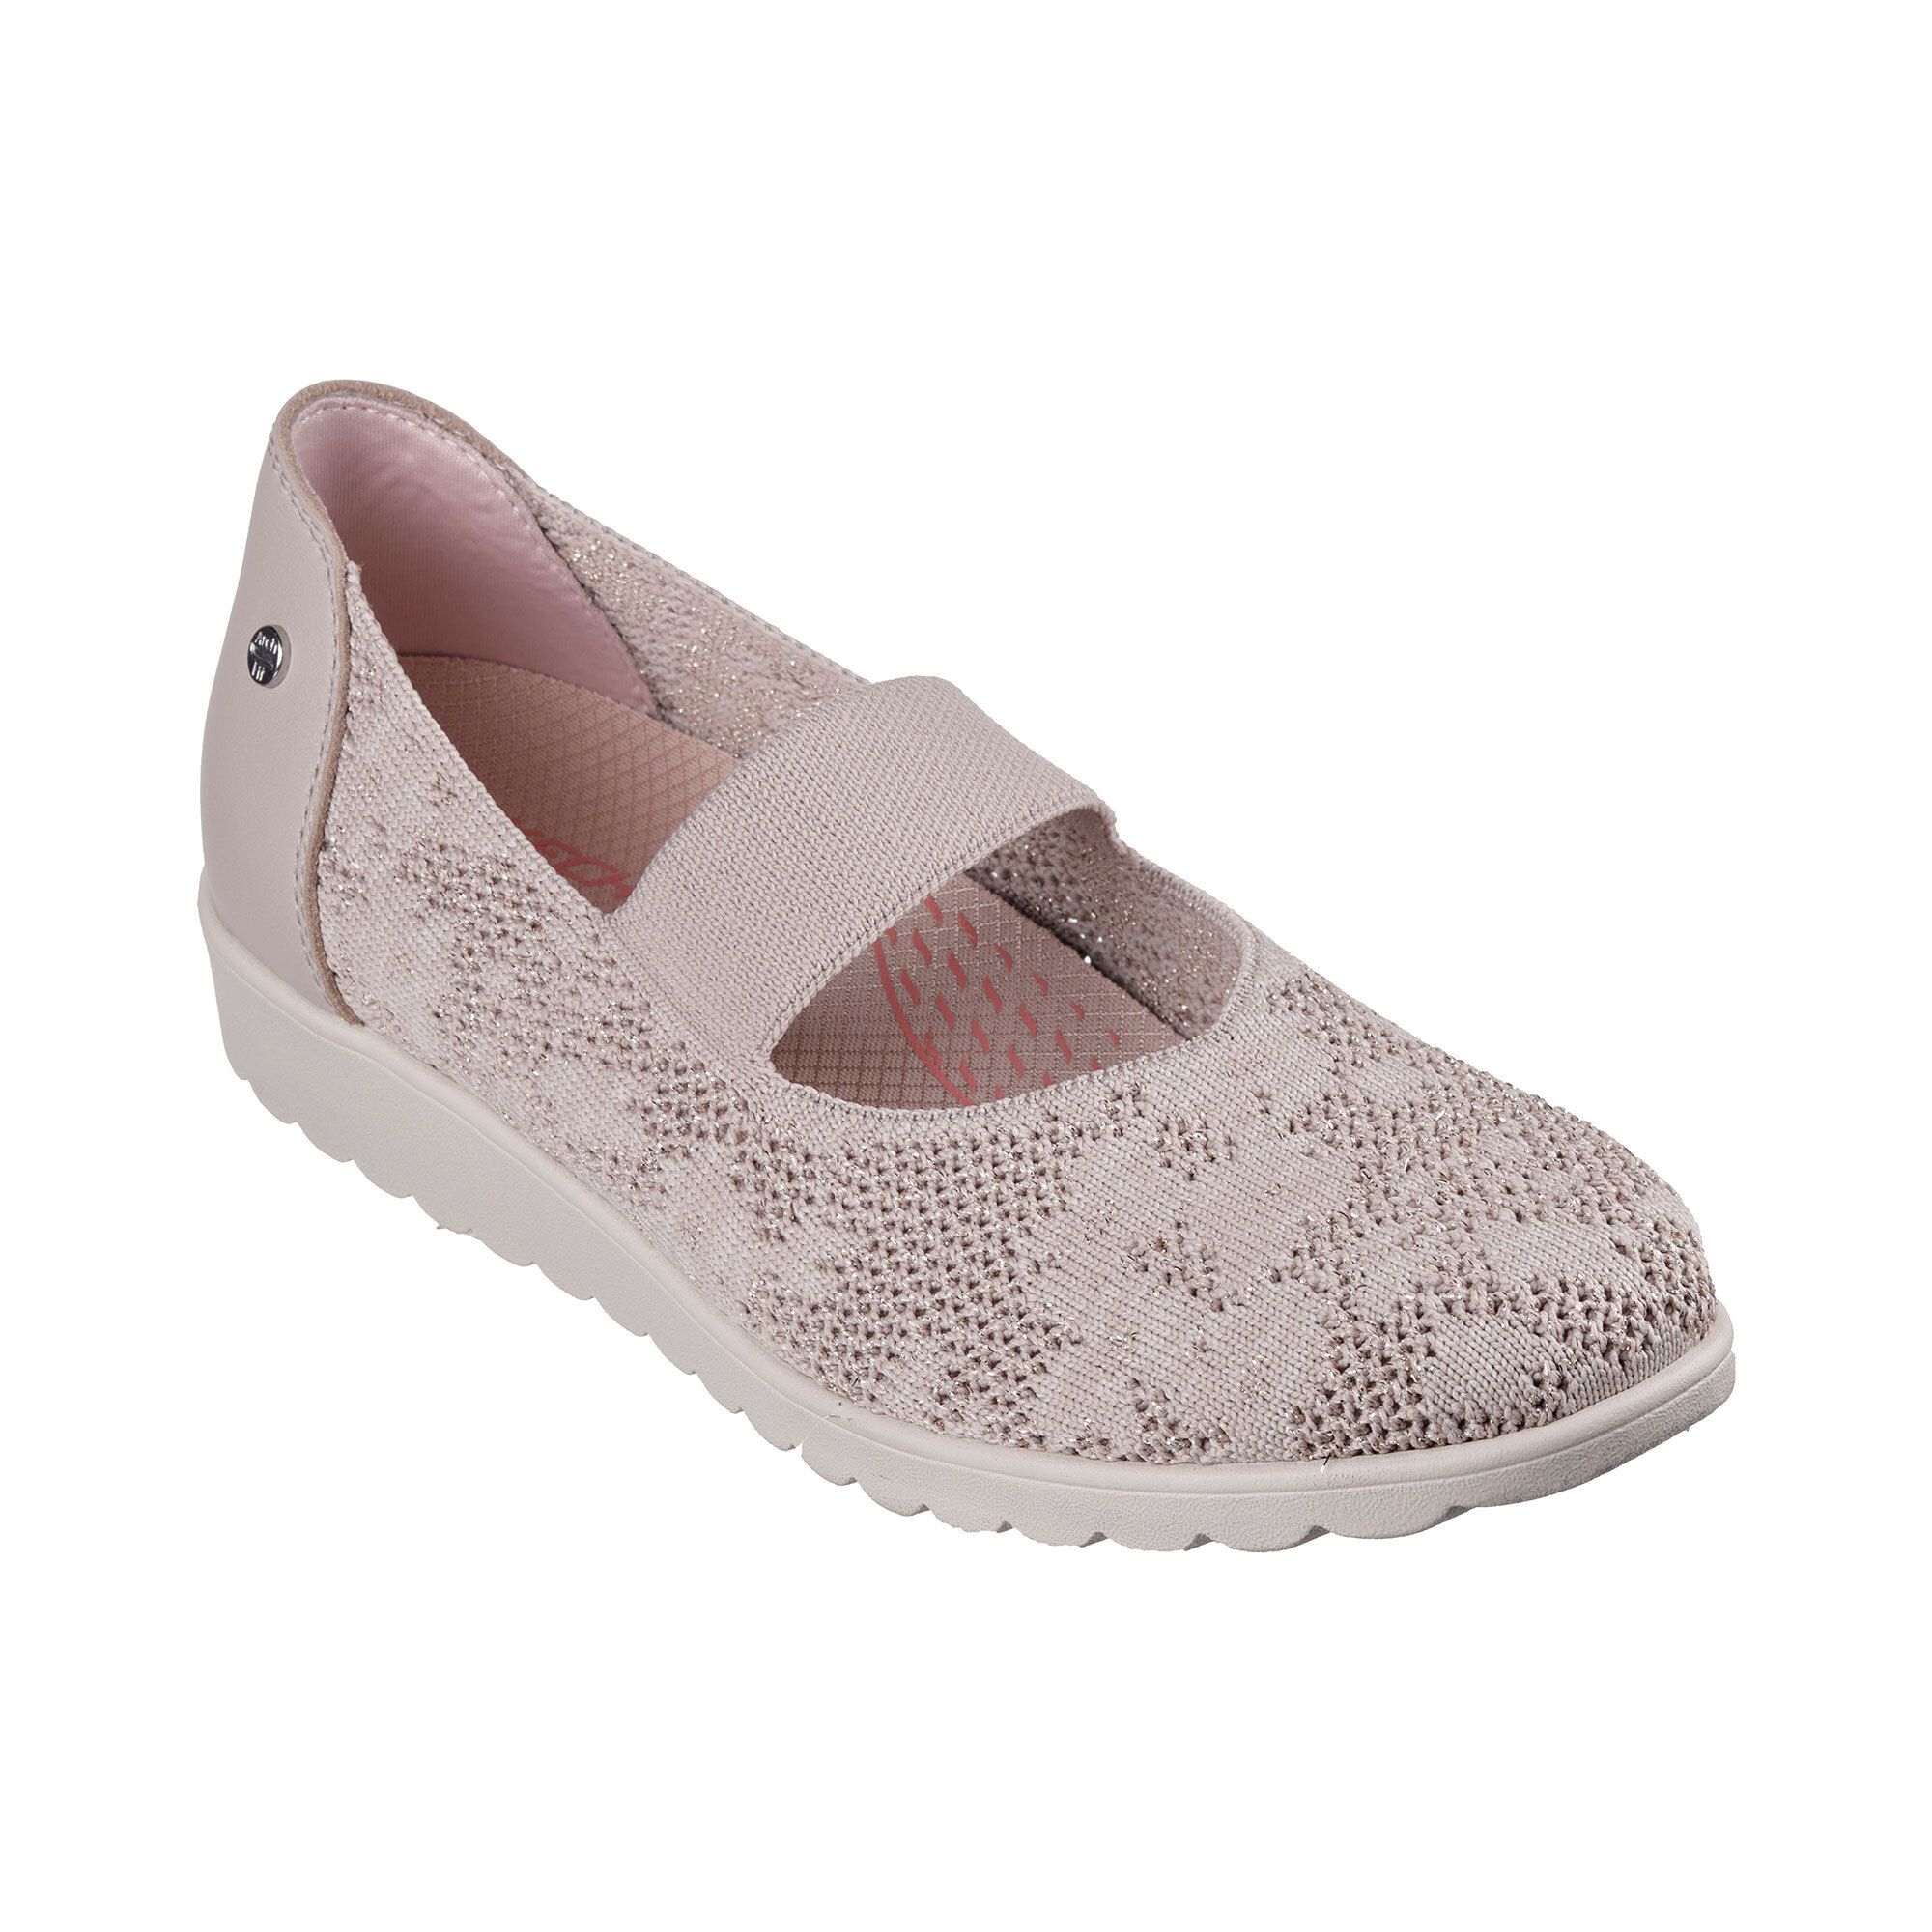 Image of Ballerine traforate con inserto Arch-fit Cleo Wedge